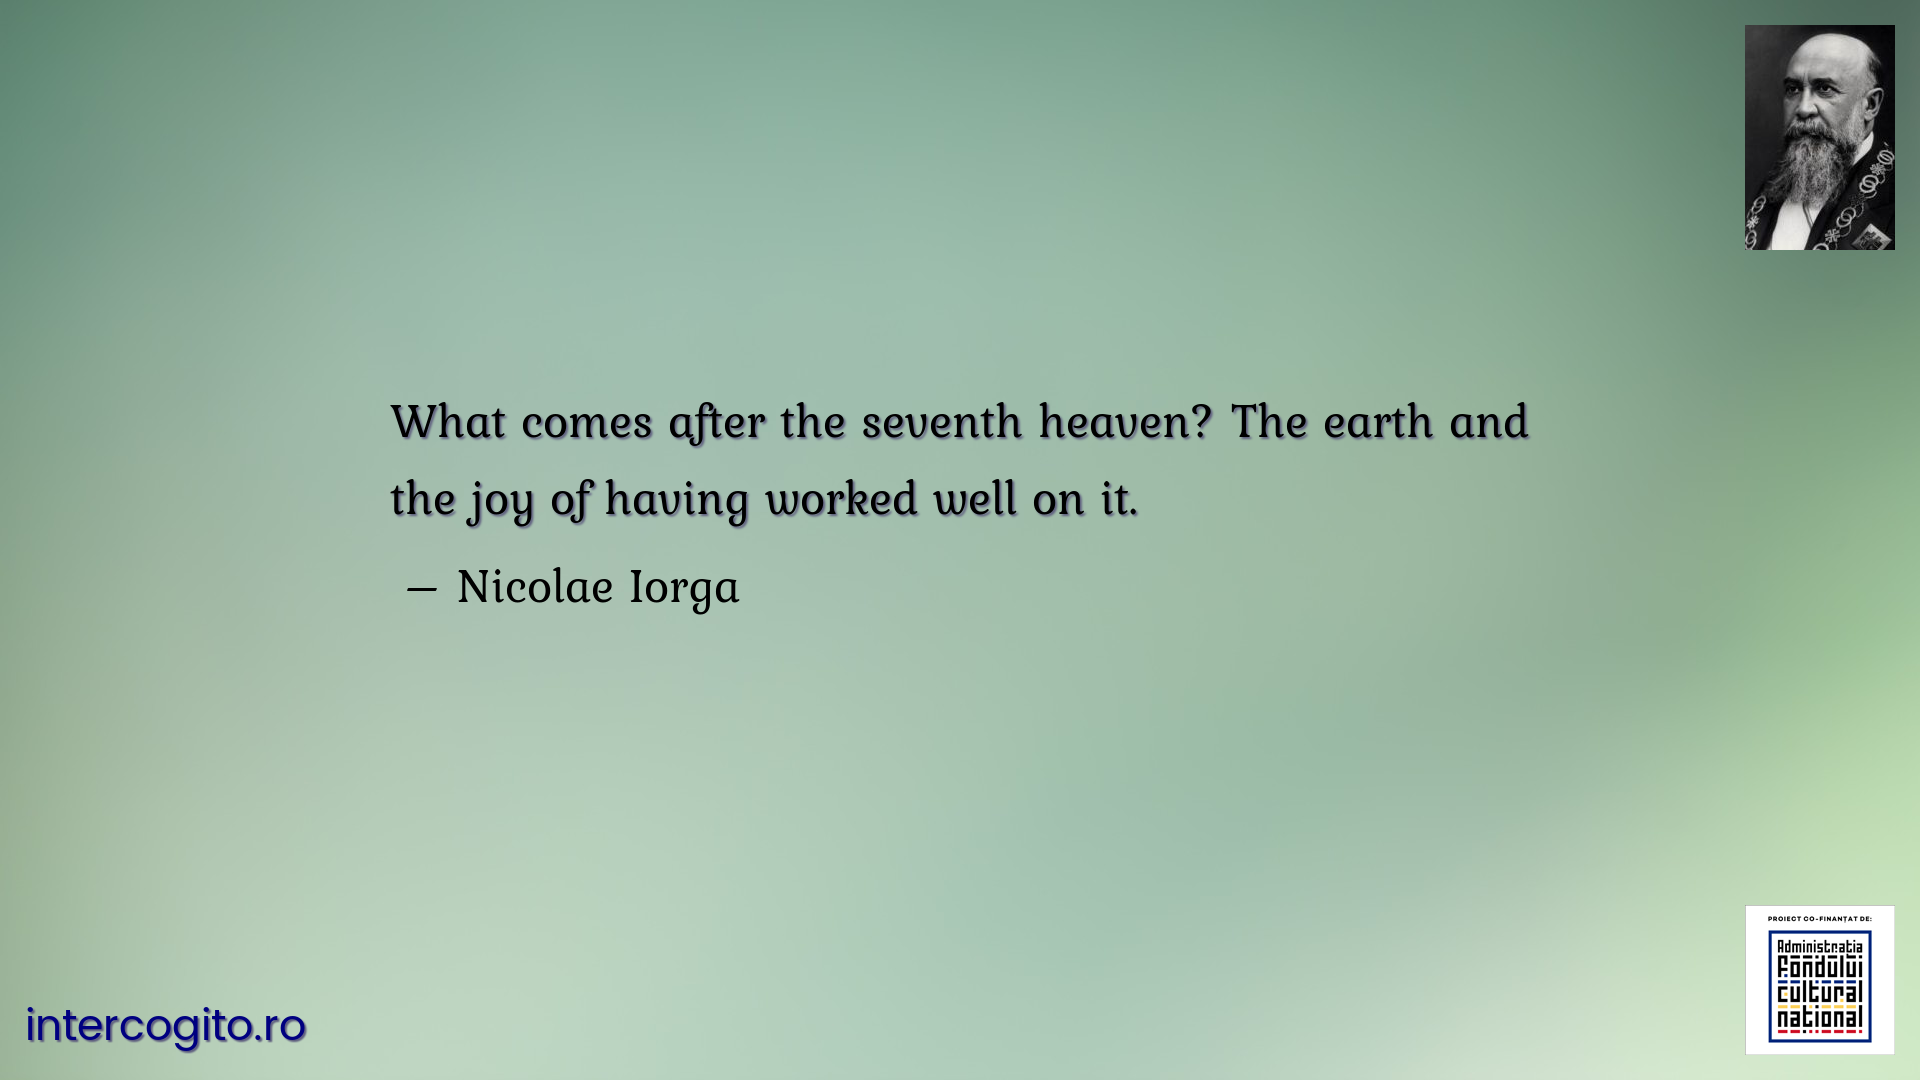 What comes after the seventh heaven? The earth and the joy of having worked well on it.